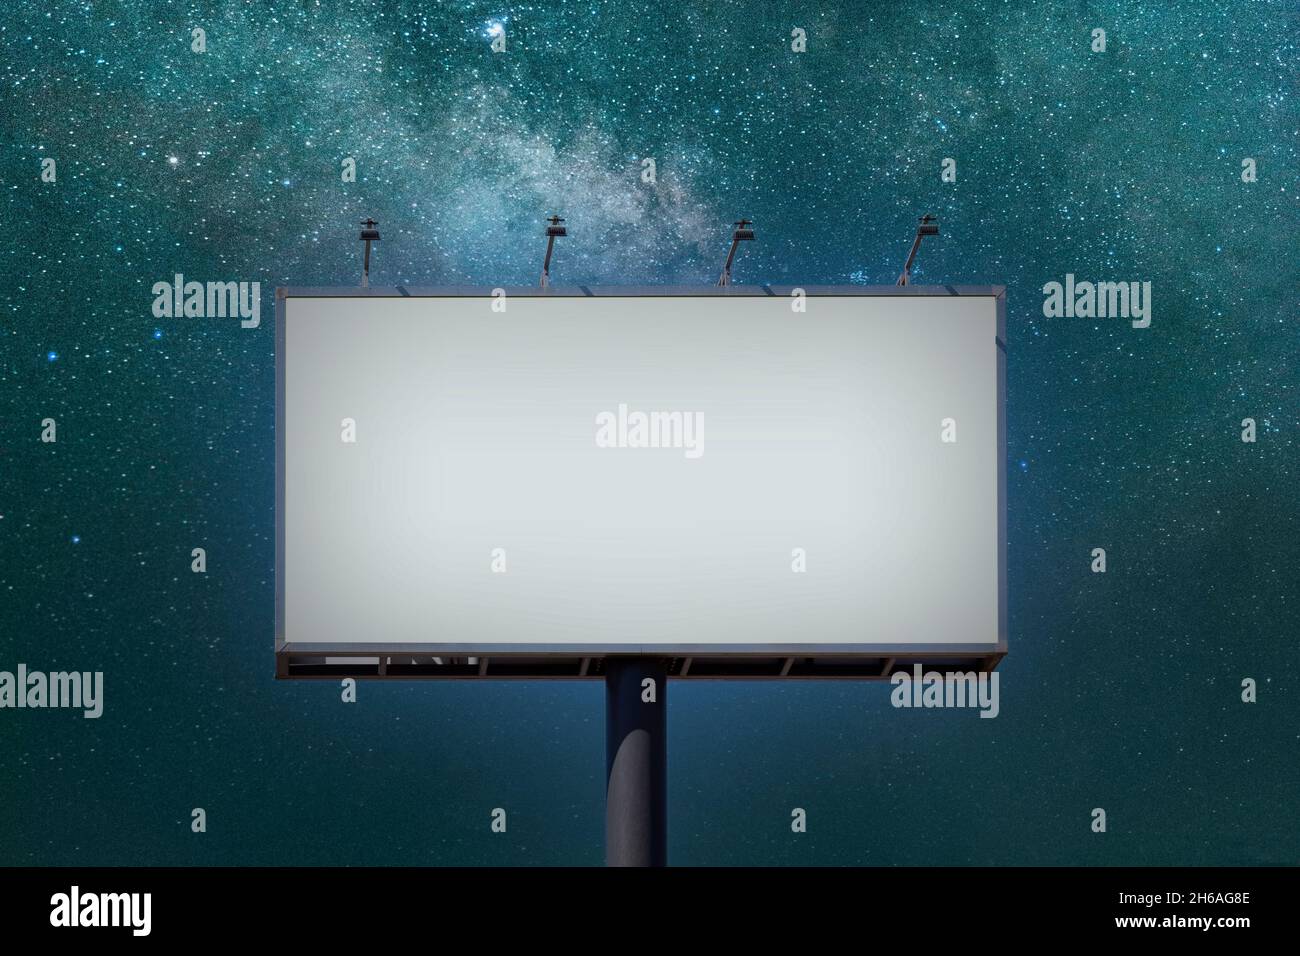 Blank billboard mock up for advertising, against stars at night Stock Photo